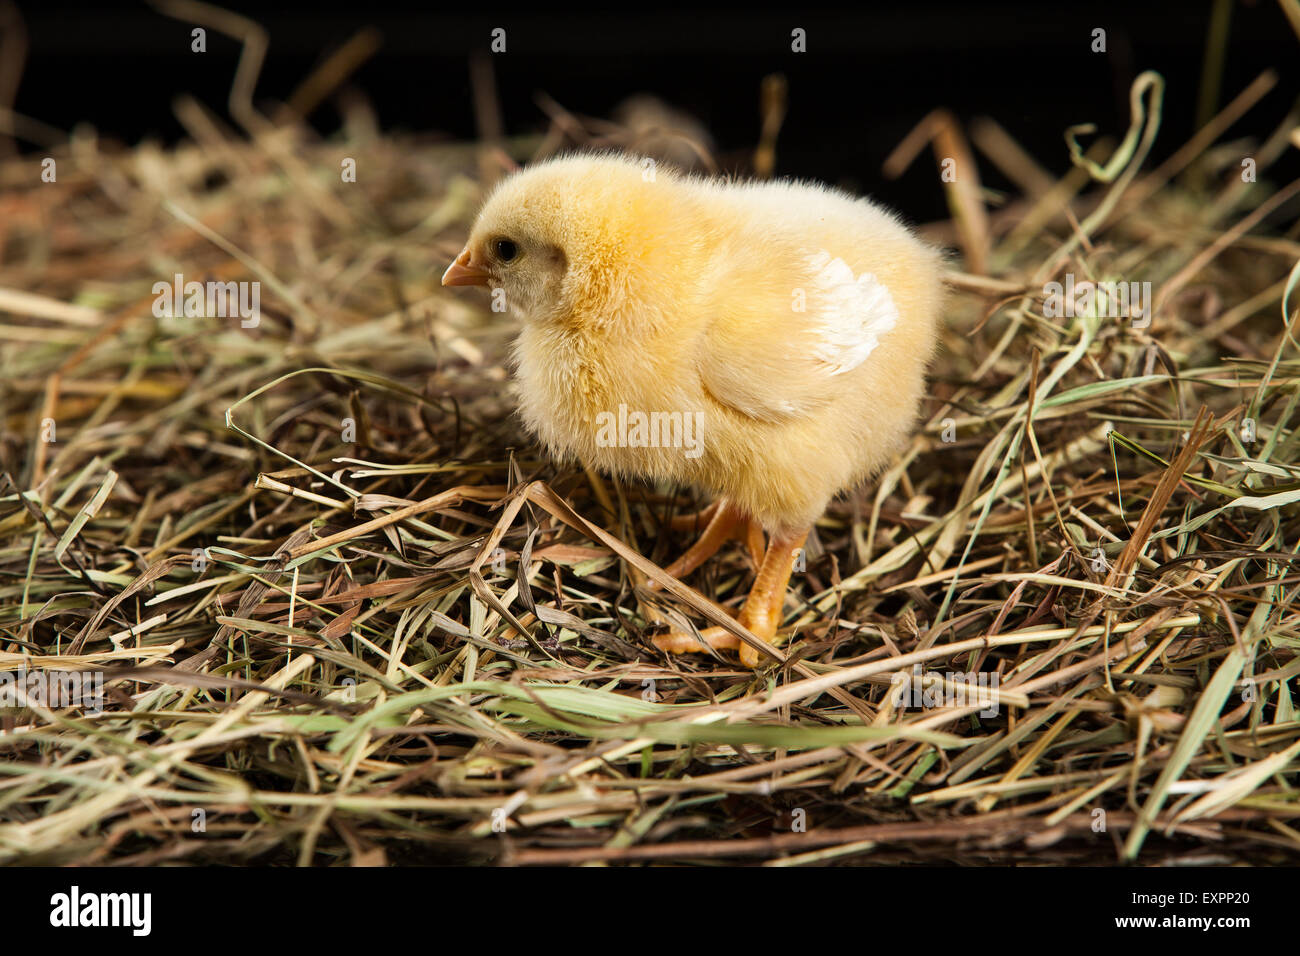 bird animals chicken poultry animal isolated pets birds livestock baby on shot studio cute small young color background domestic Stock Photo